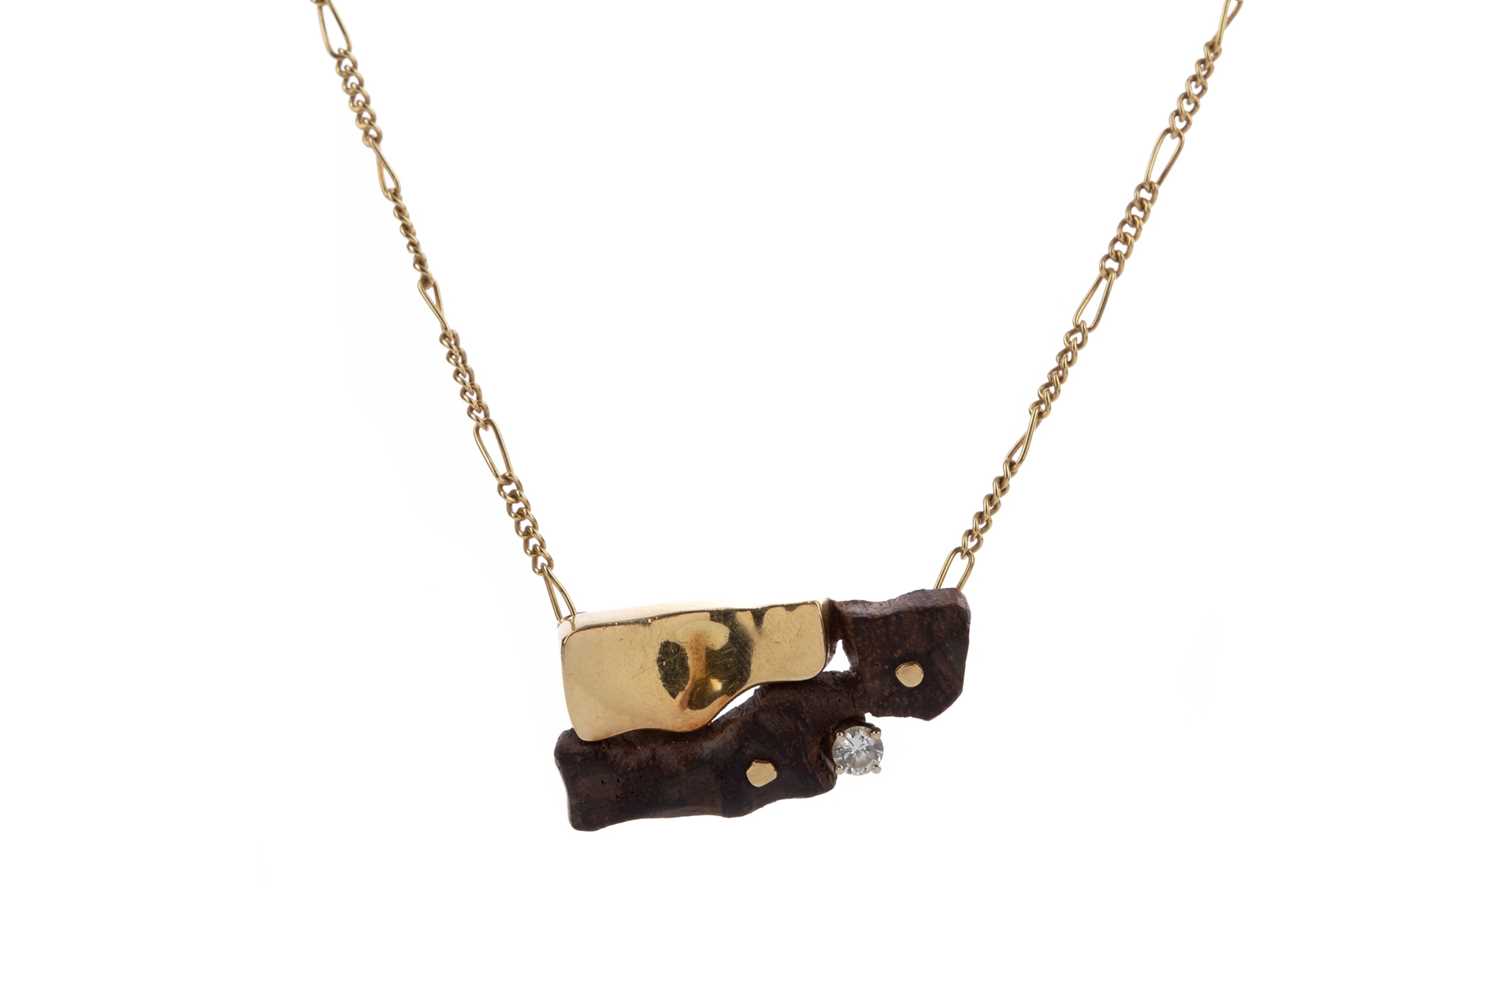 Lot 952 - A GOLD, DIAMOND AND WOOD NECKLET